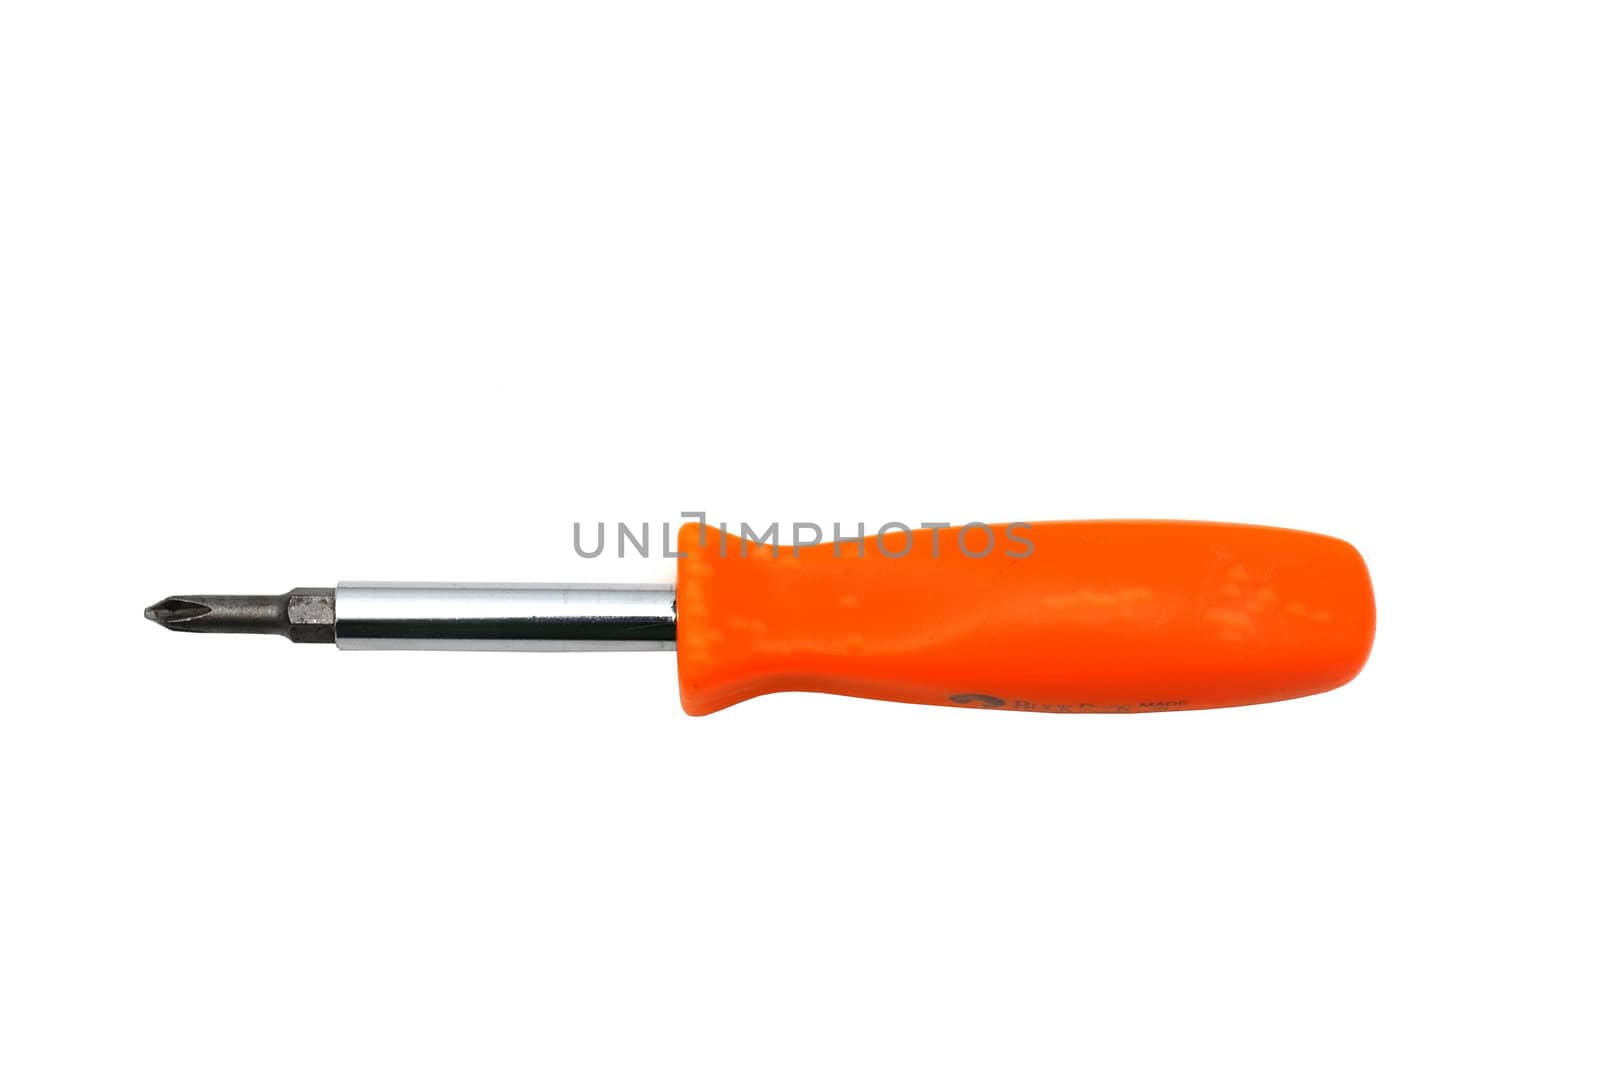 An Orange screw driver isolated on a white back ground